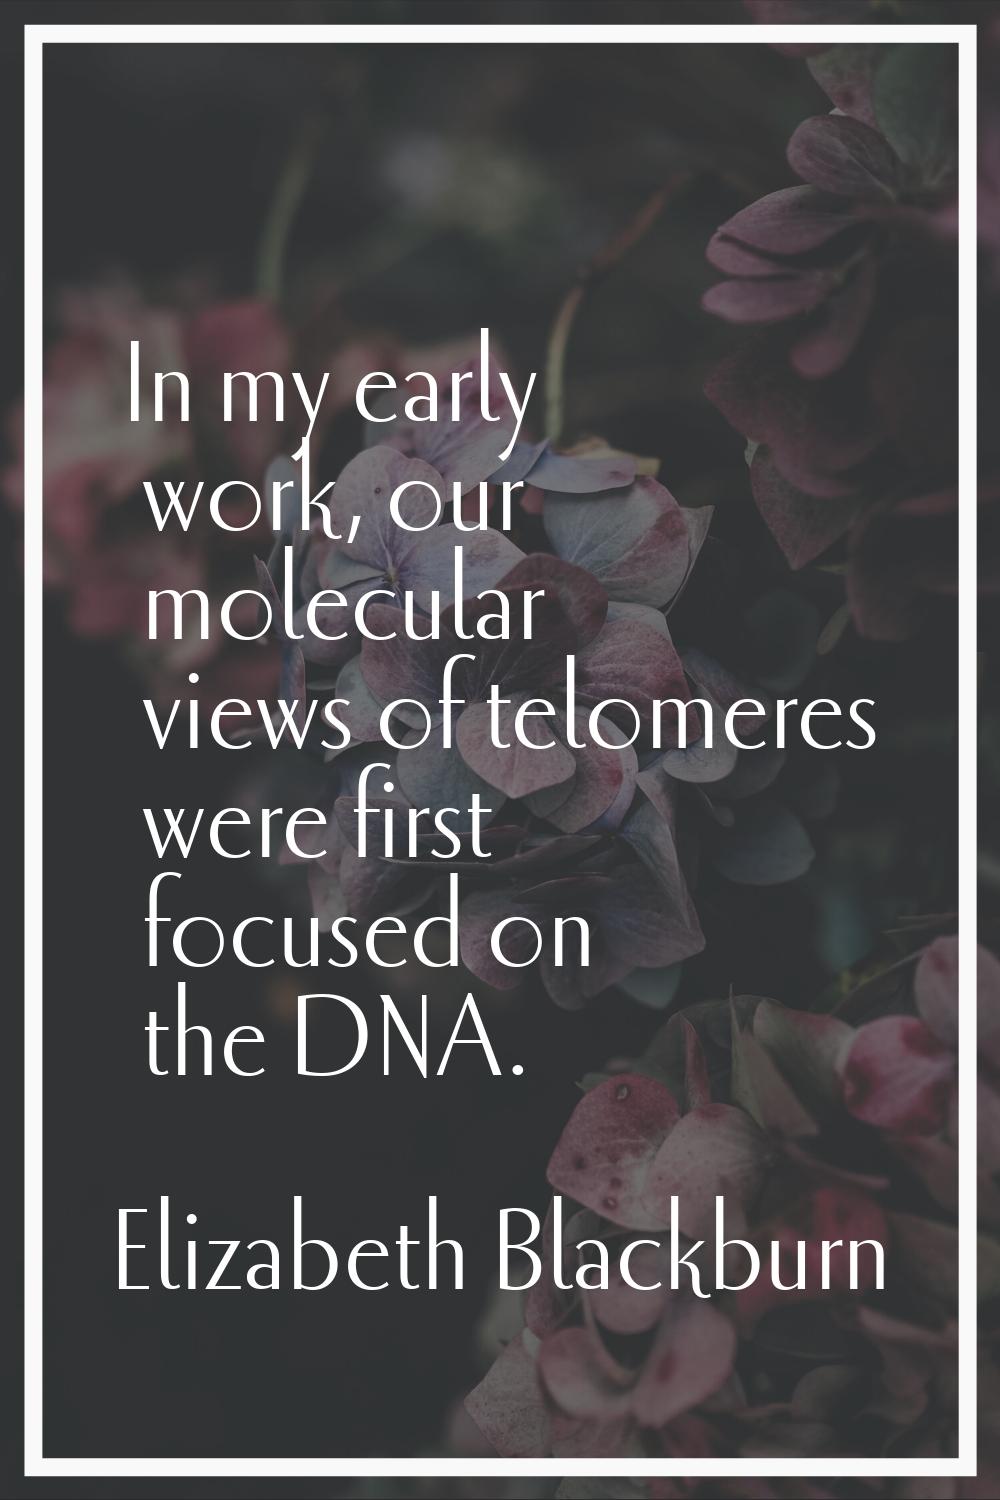 In my early work, our molecular views of telomeres were first focused on the DNA.